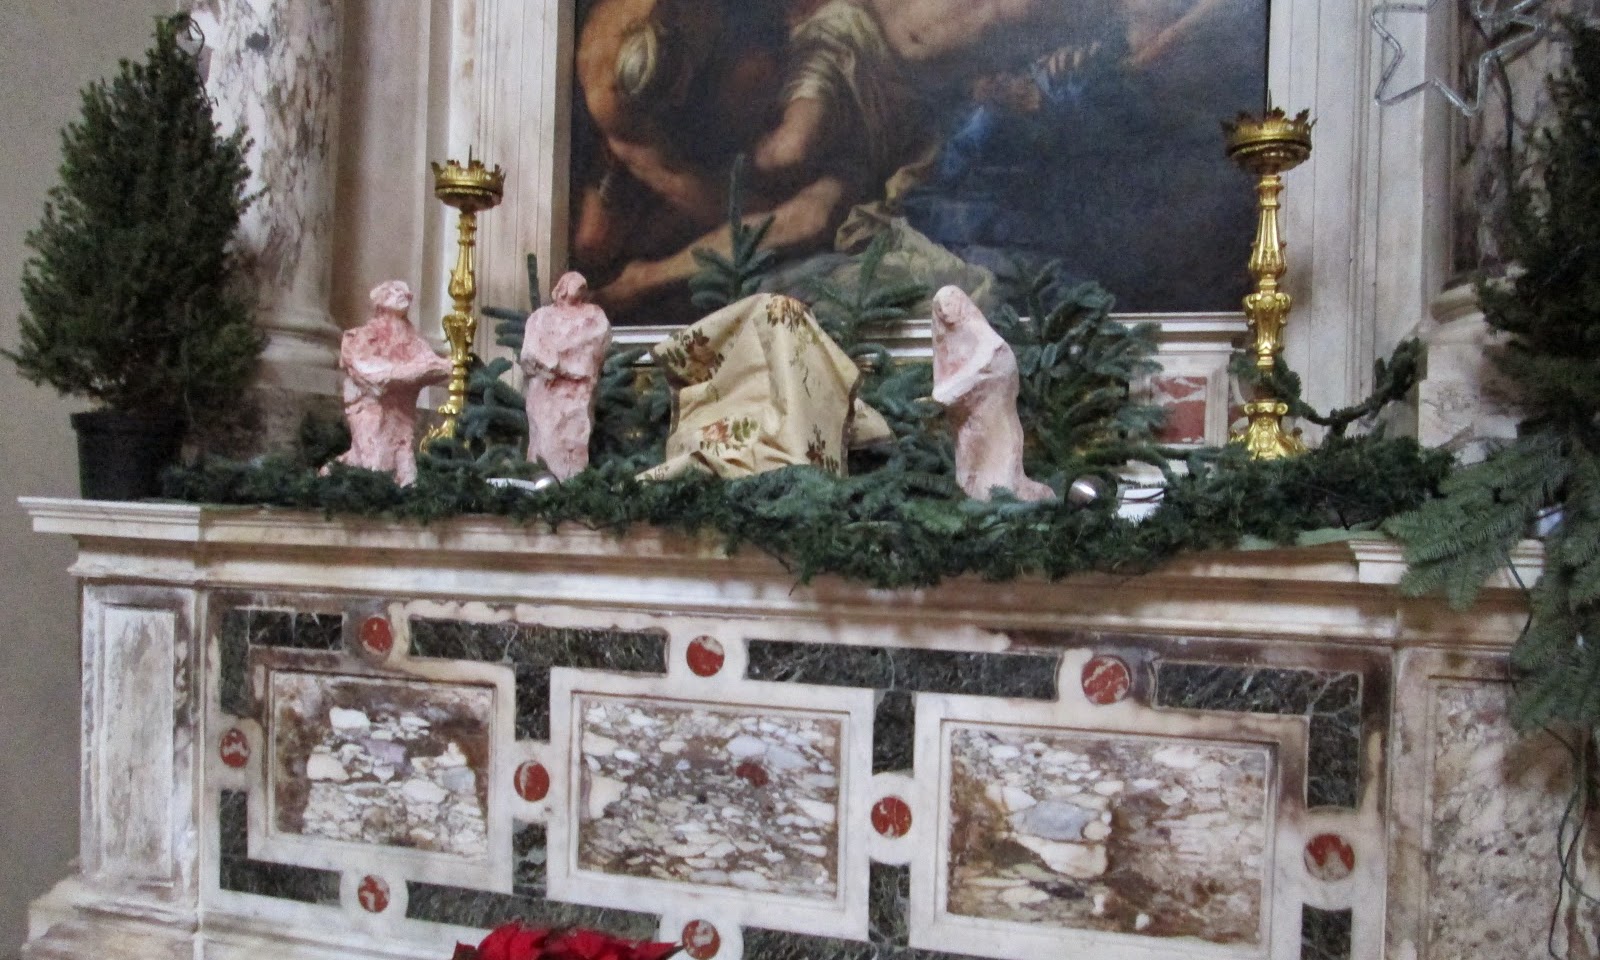 HOW THE NATIVITY SCENES IN VENICE REFLECT EVERYDAY LIFE IN TOWN